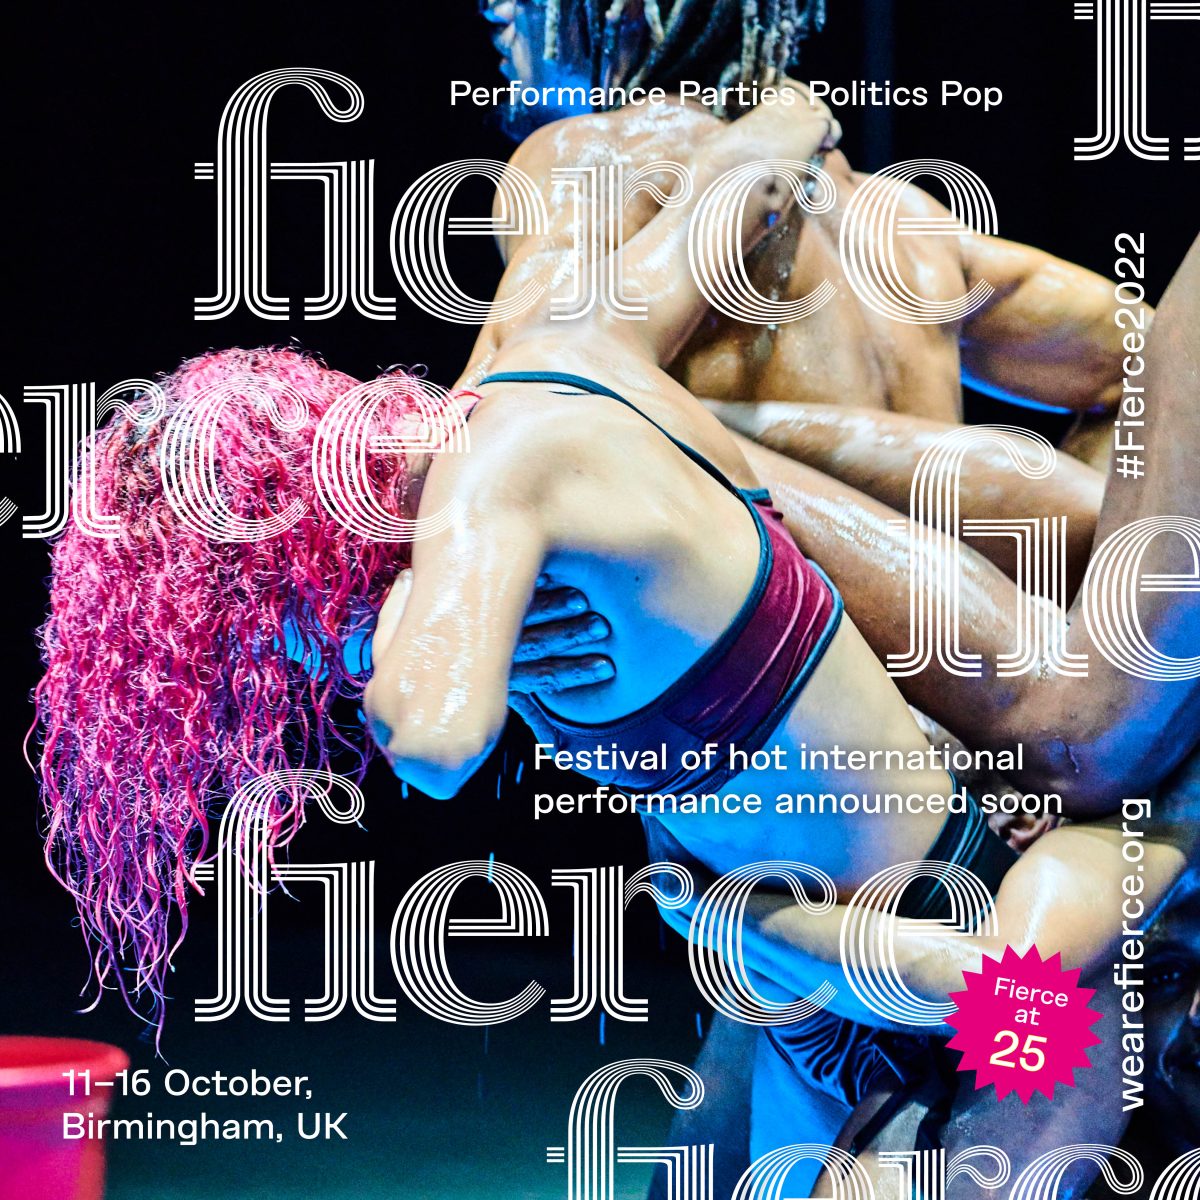 FIERCE ANNOUNCES PROGRAMME FOR 25TH ANNIVERSARY FESTIVAL 11-16 OCTOBER 2022